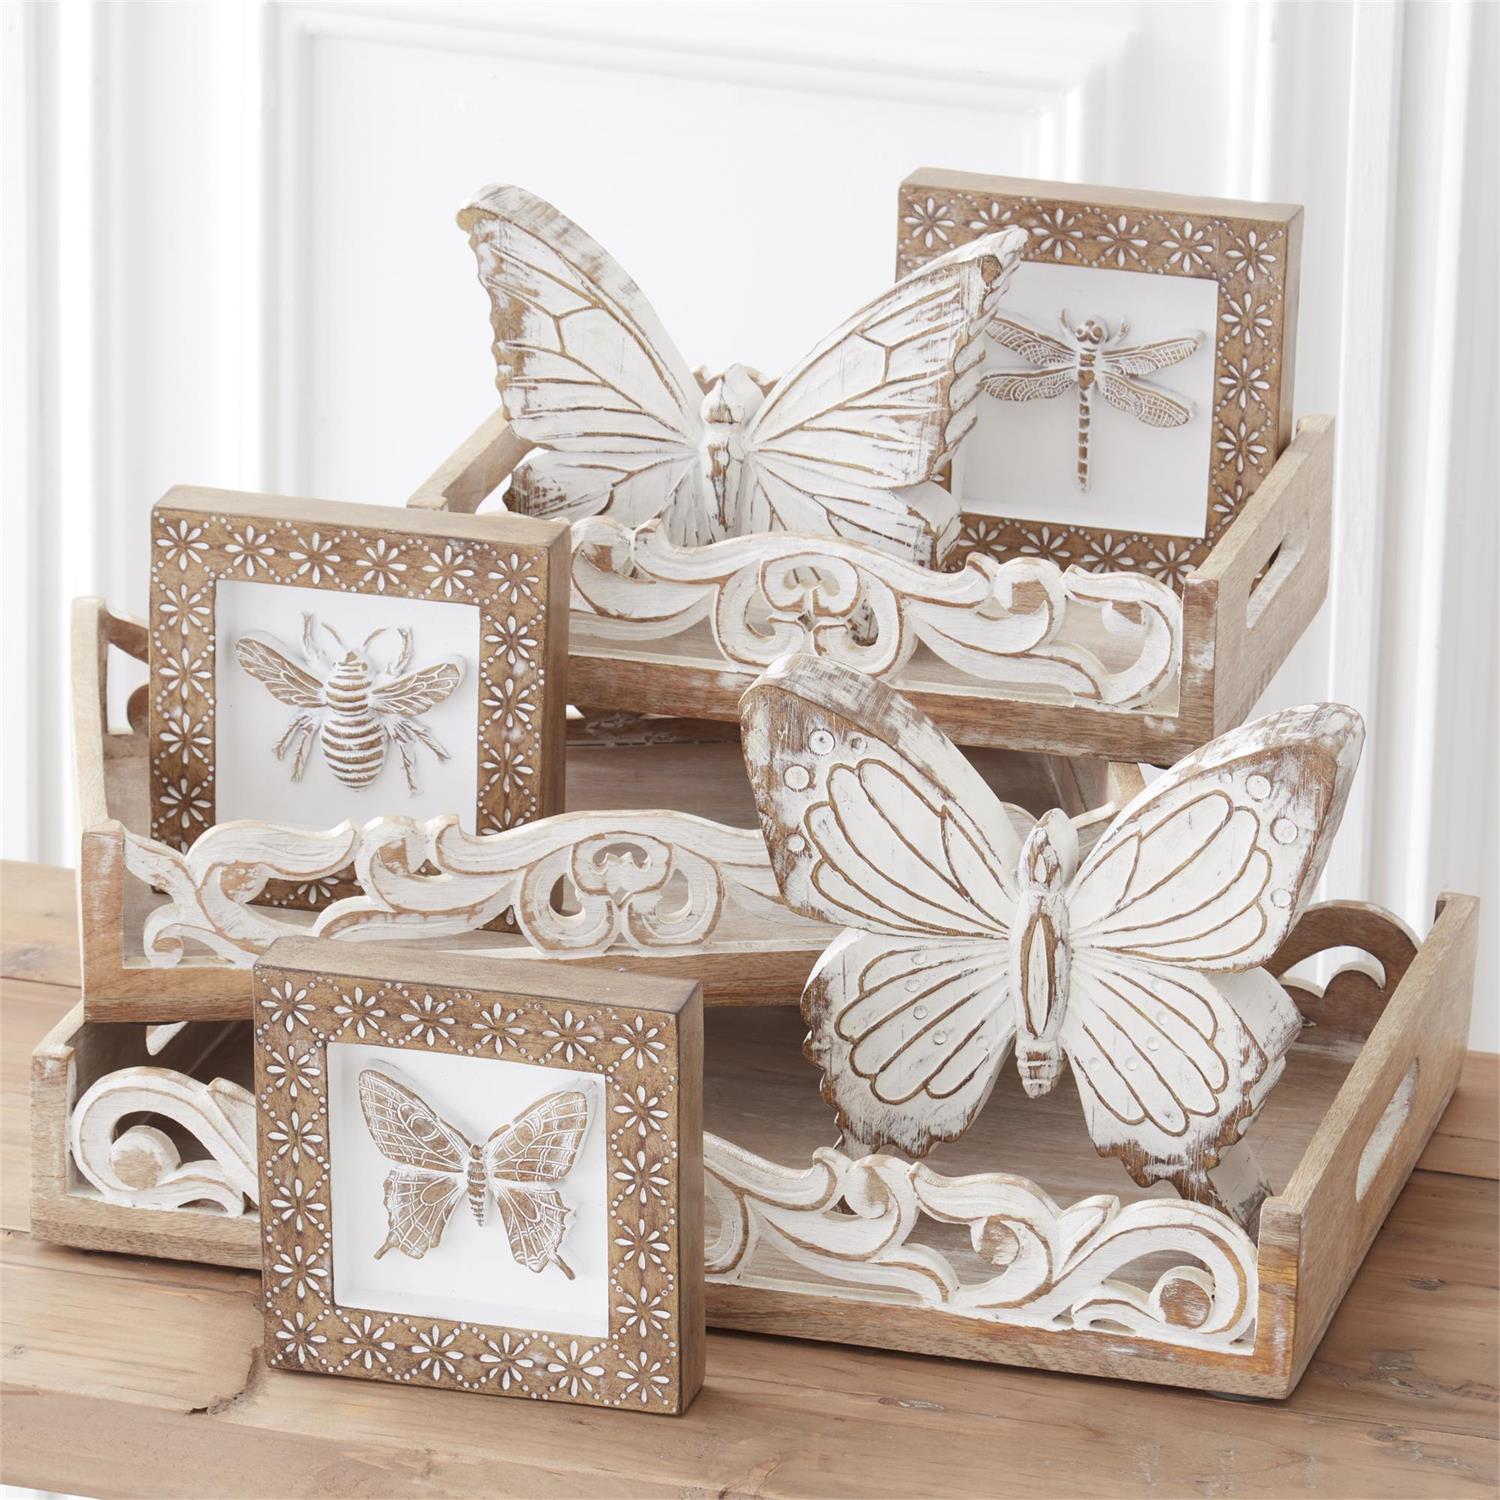 6 INCH WHITEWASHED CARVED RESIN INSECT SHADOW BOXES